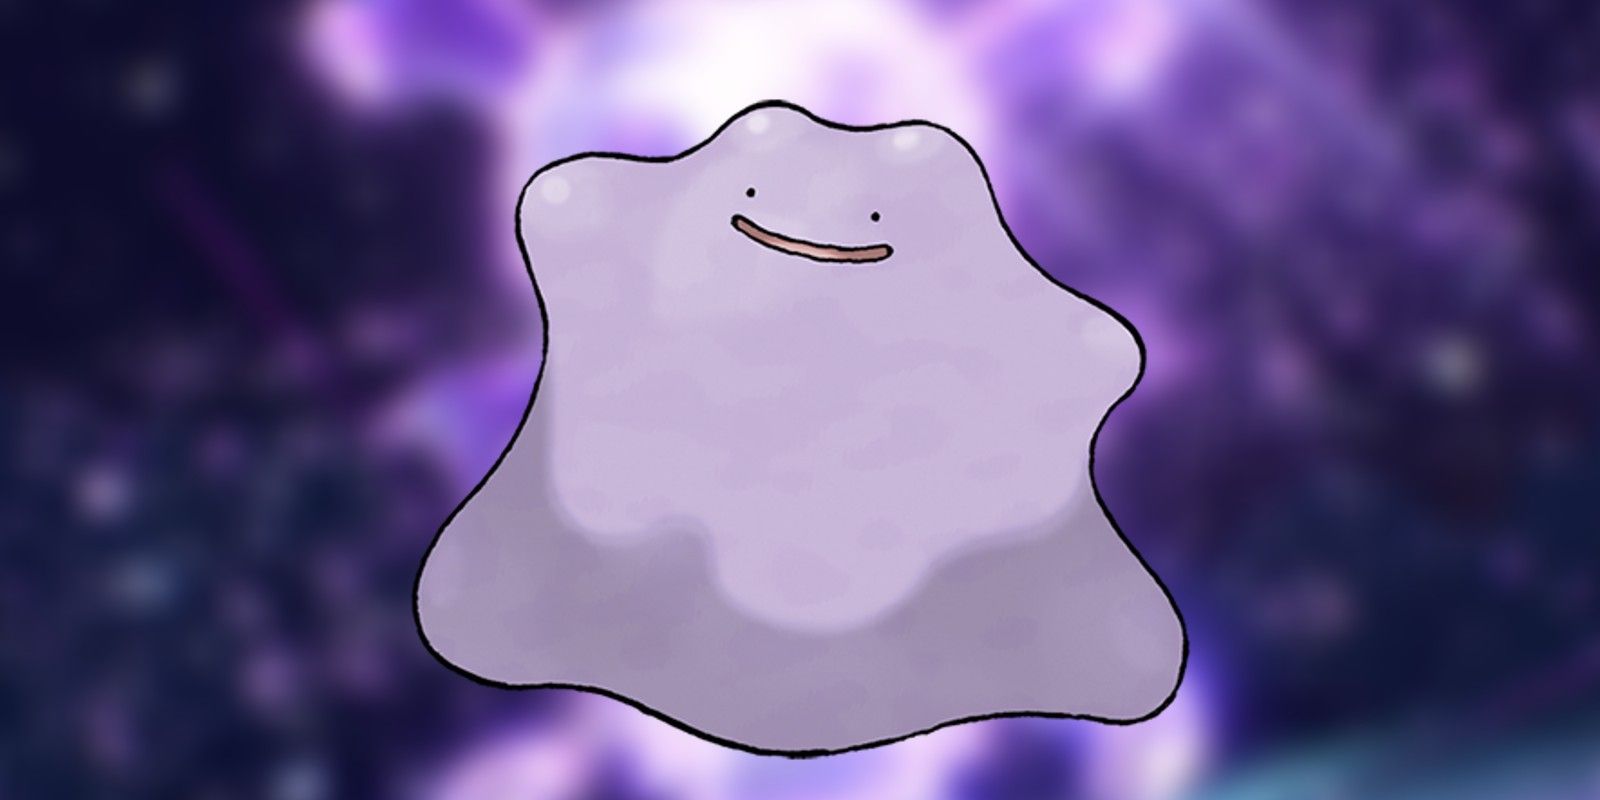 Pokémon Scarlet and Violet: Where to find Ditto